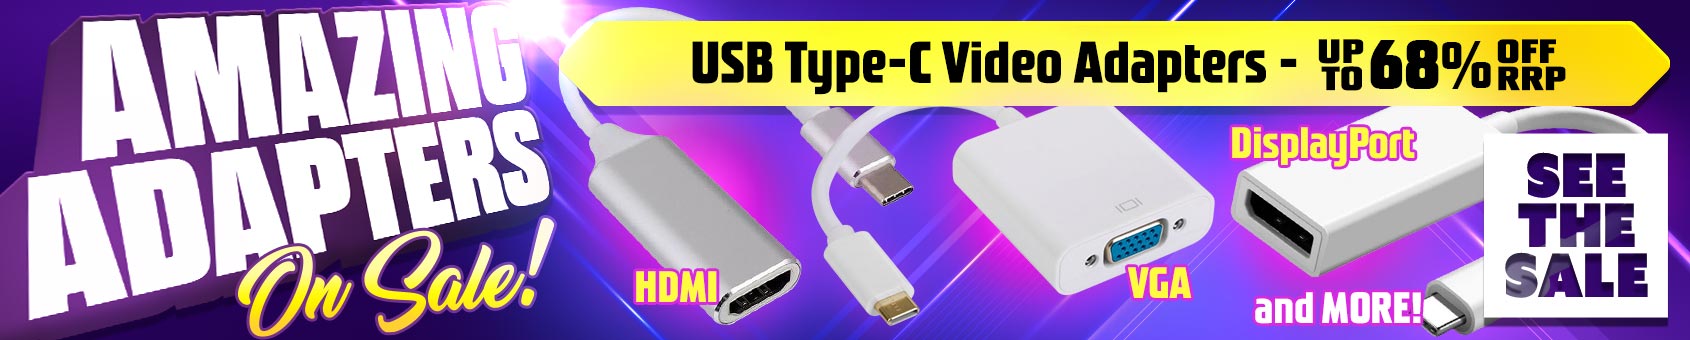 Our BIGGEST SALE EVER on USB-C AV Converter Adapters during April!!!